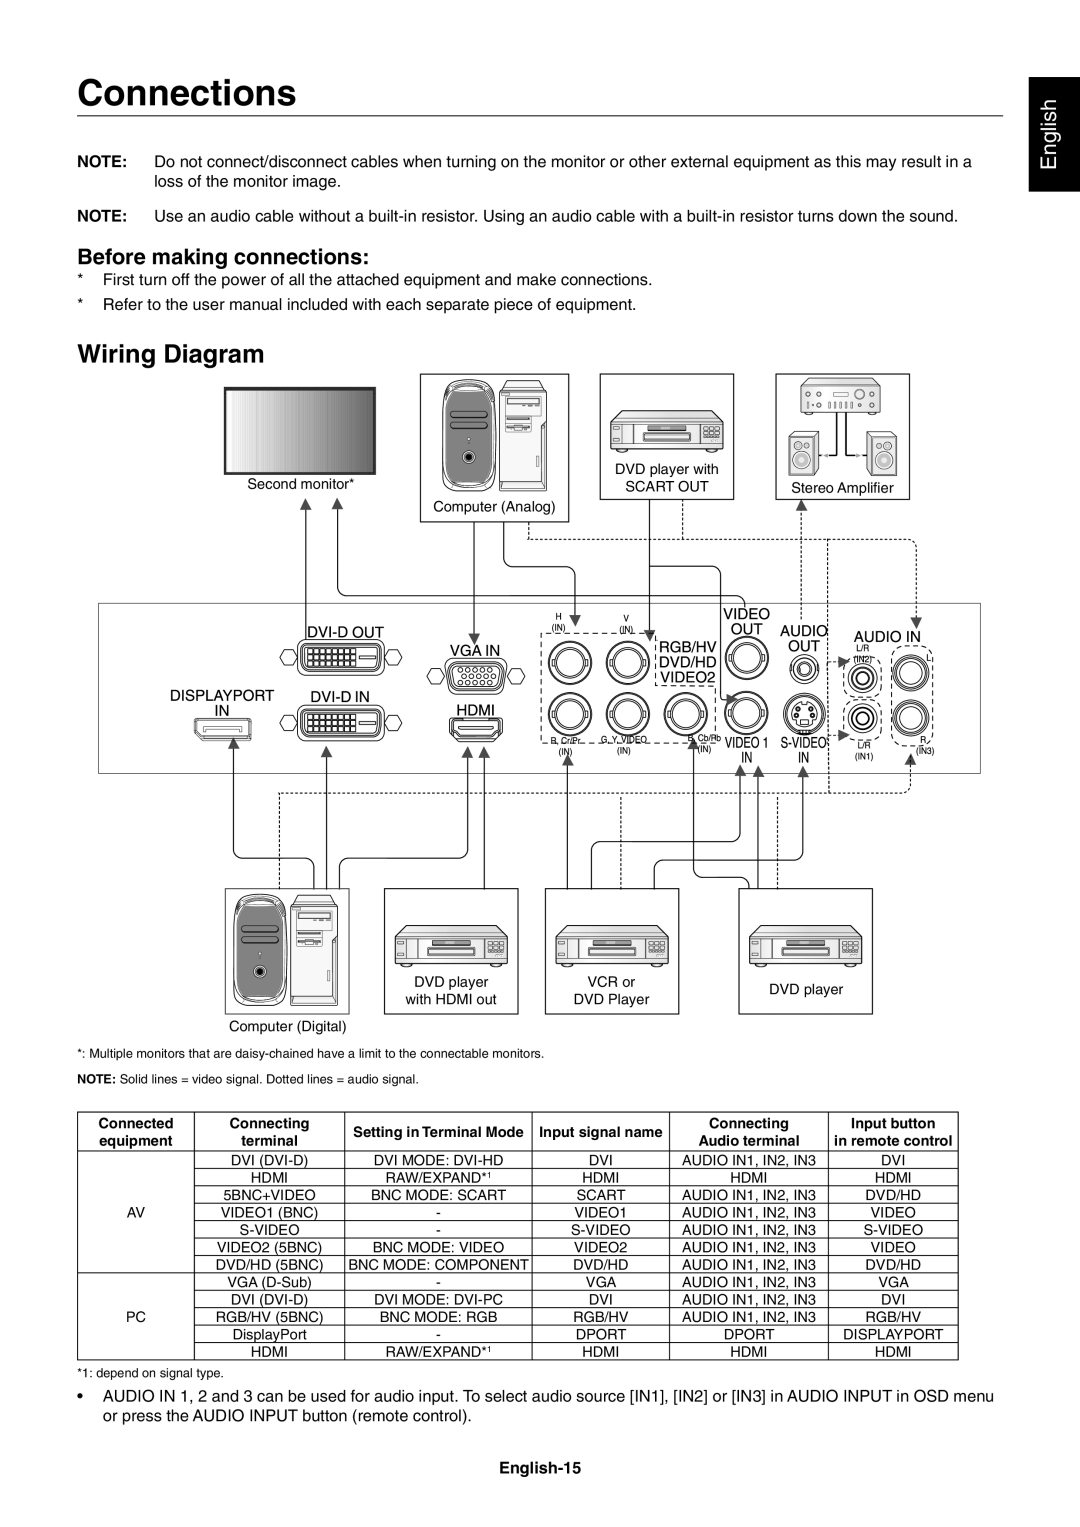 NEC V422, V551, V651 user manual Connections, Wiring Diagram, Before making connections, English-15 